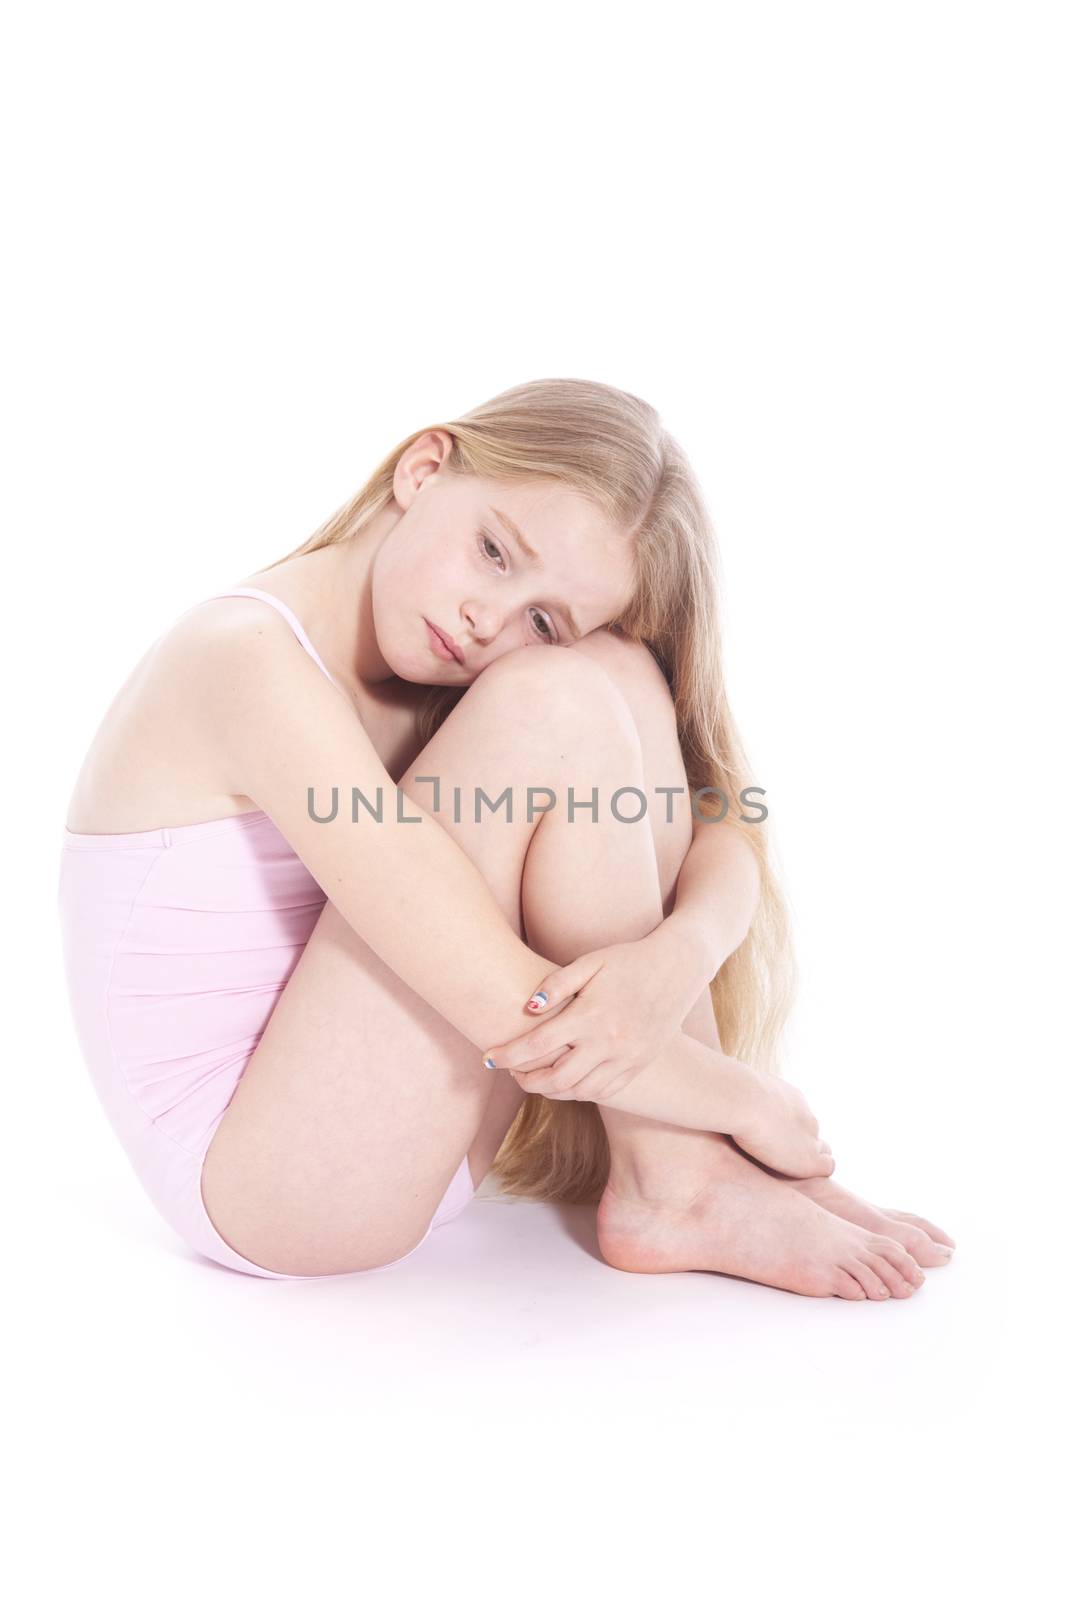 young girl in pink with sad expression sitting on floor of studio against white background